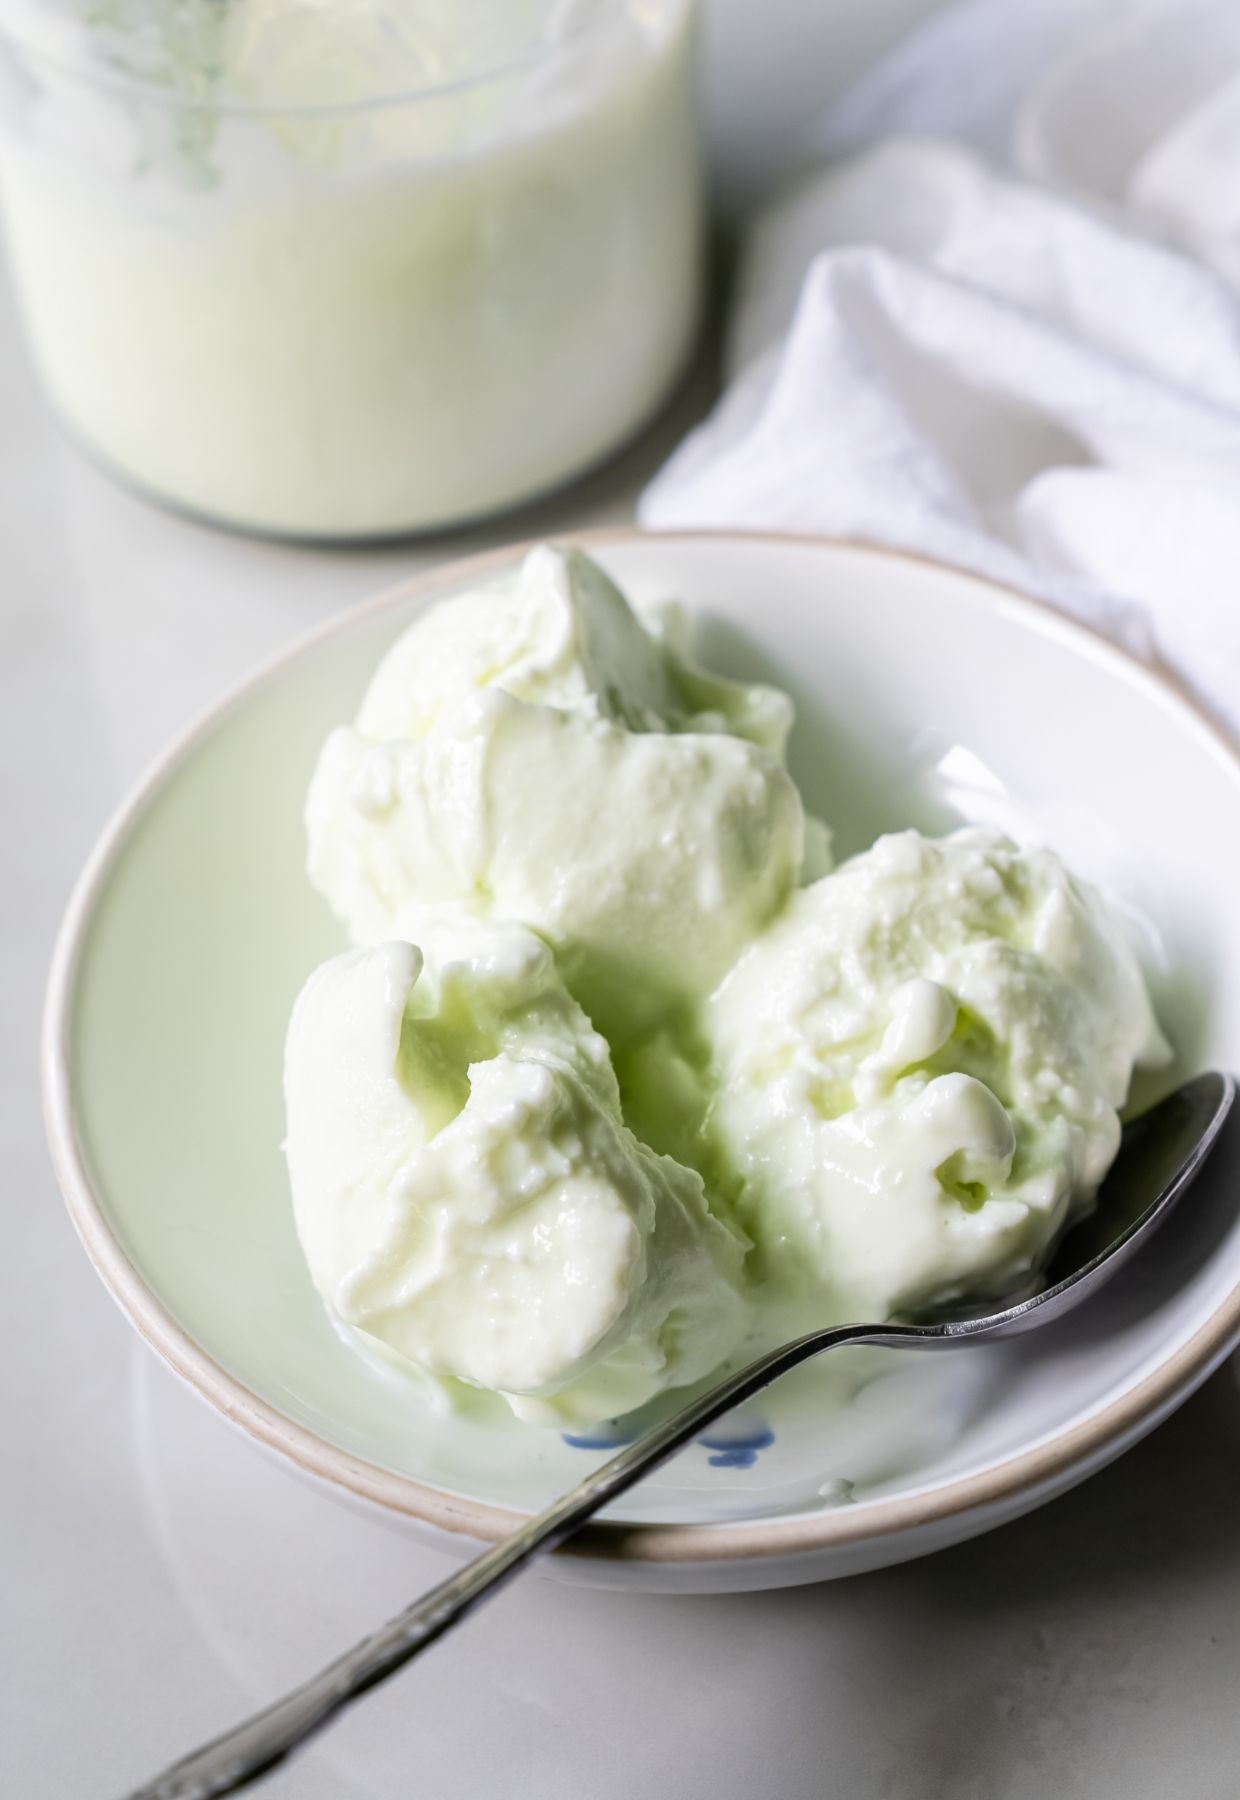 A bowl with three scoops of light green ice cream, an irresistible sight among desserts, and a spoon rests on a white surface. A jar with more ice cream and a white cloth are visible in the background.